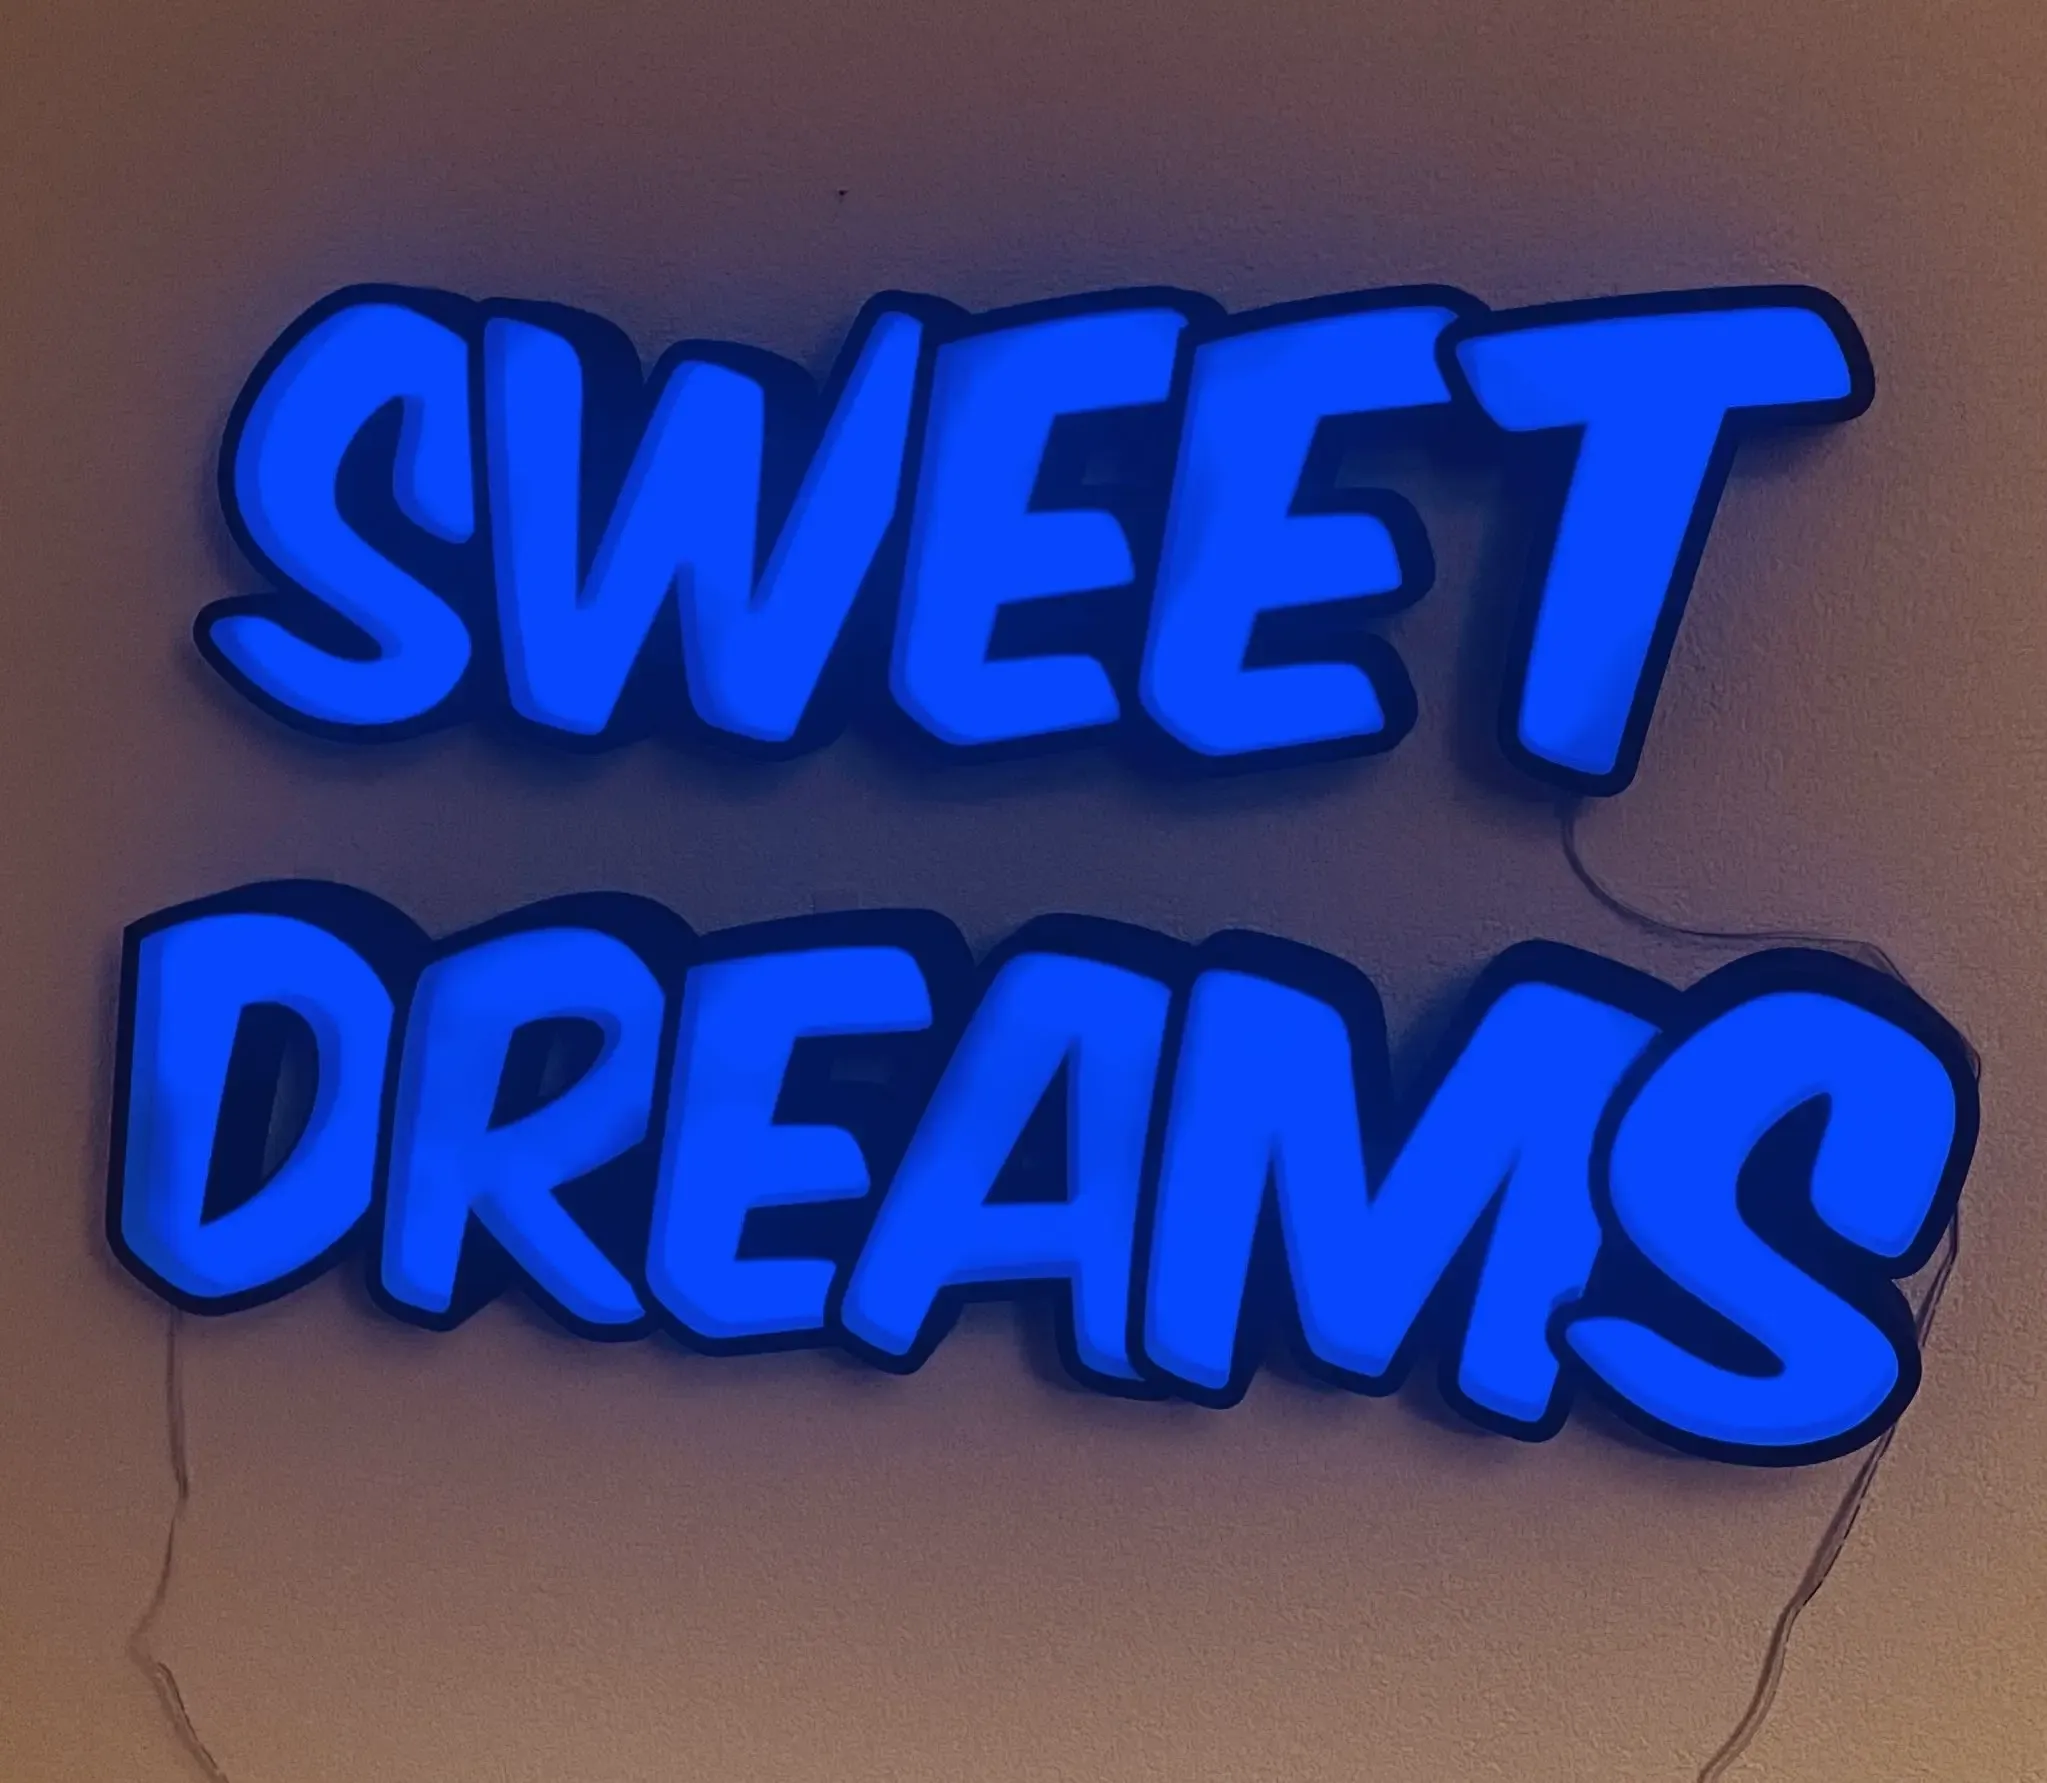 LED Night light „Sweet Dreams“ by ST3MP